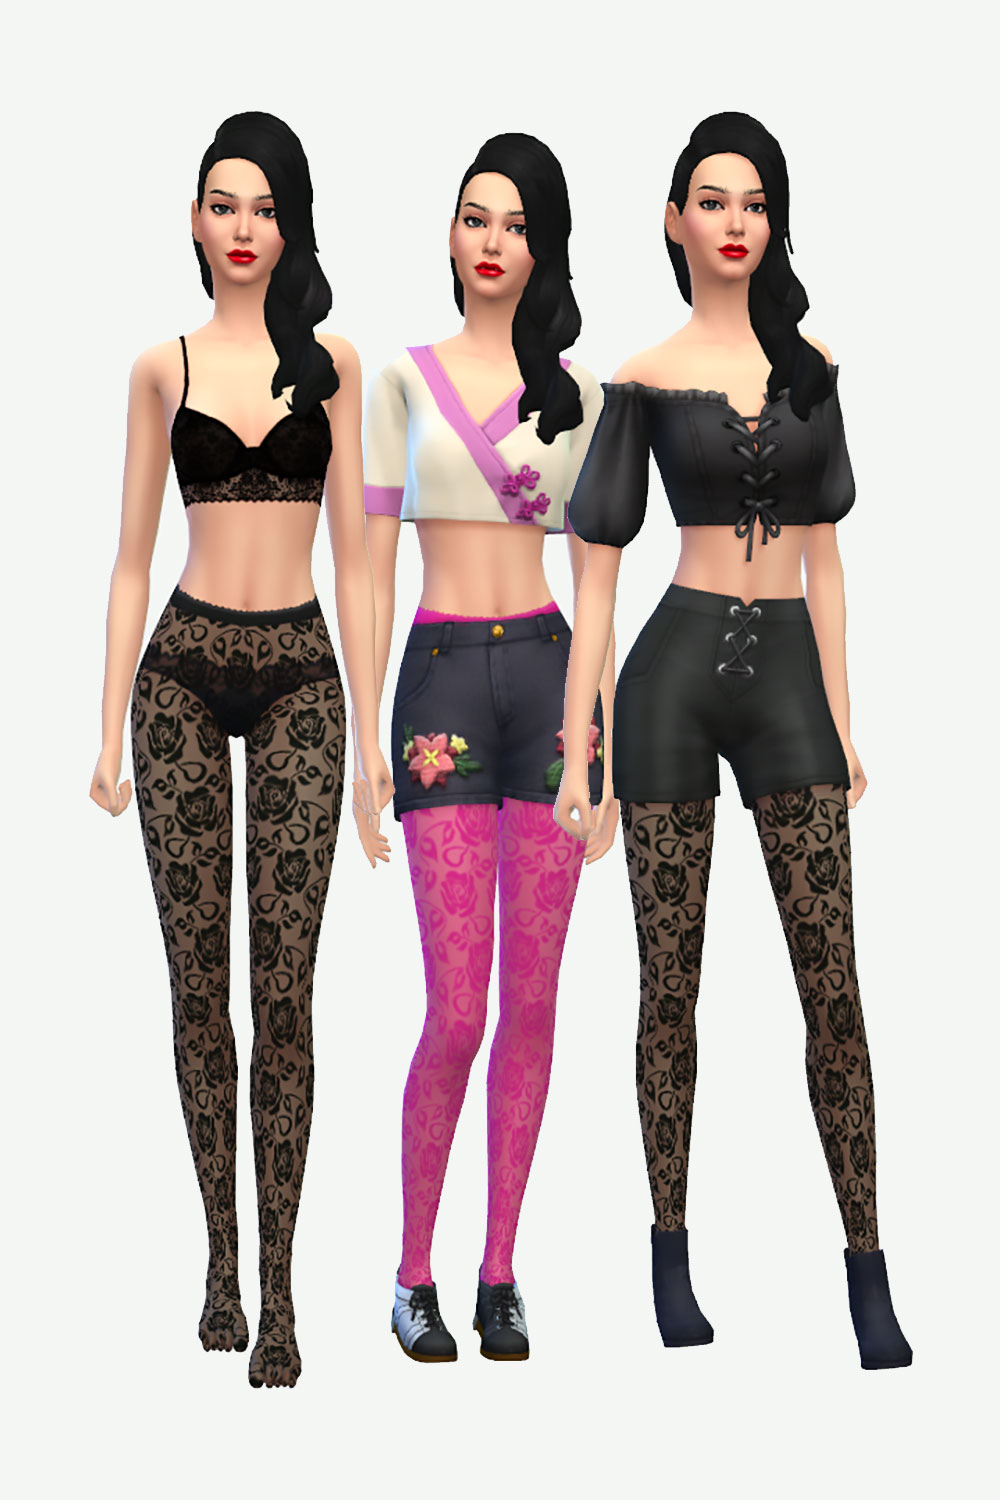 The Sims 4 Floral Pattern Tights